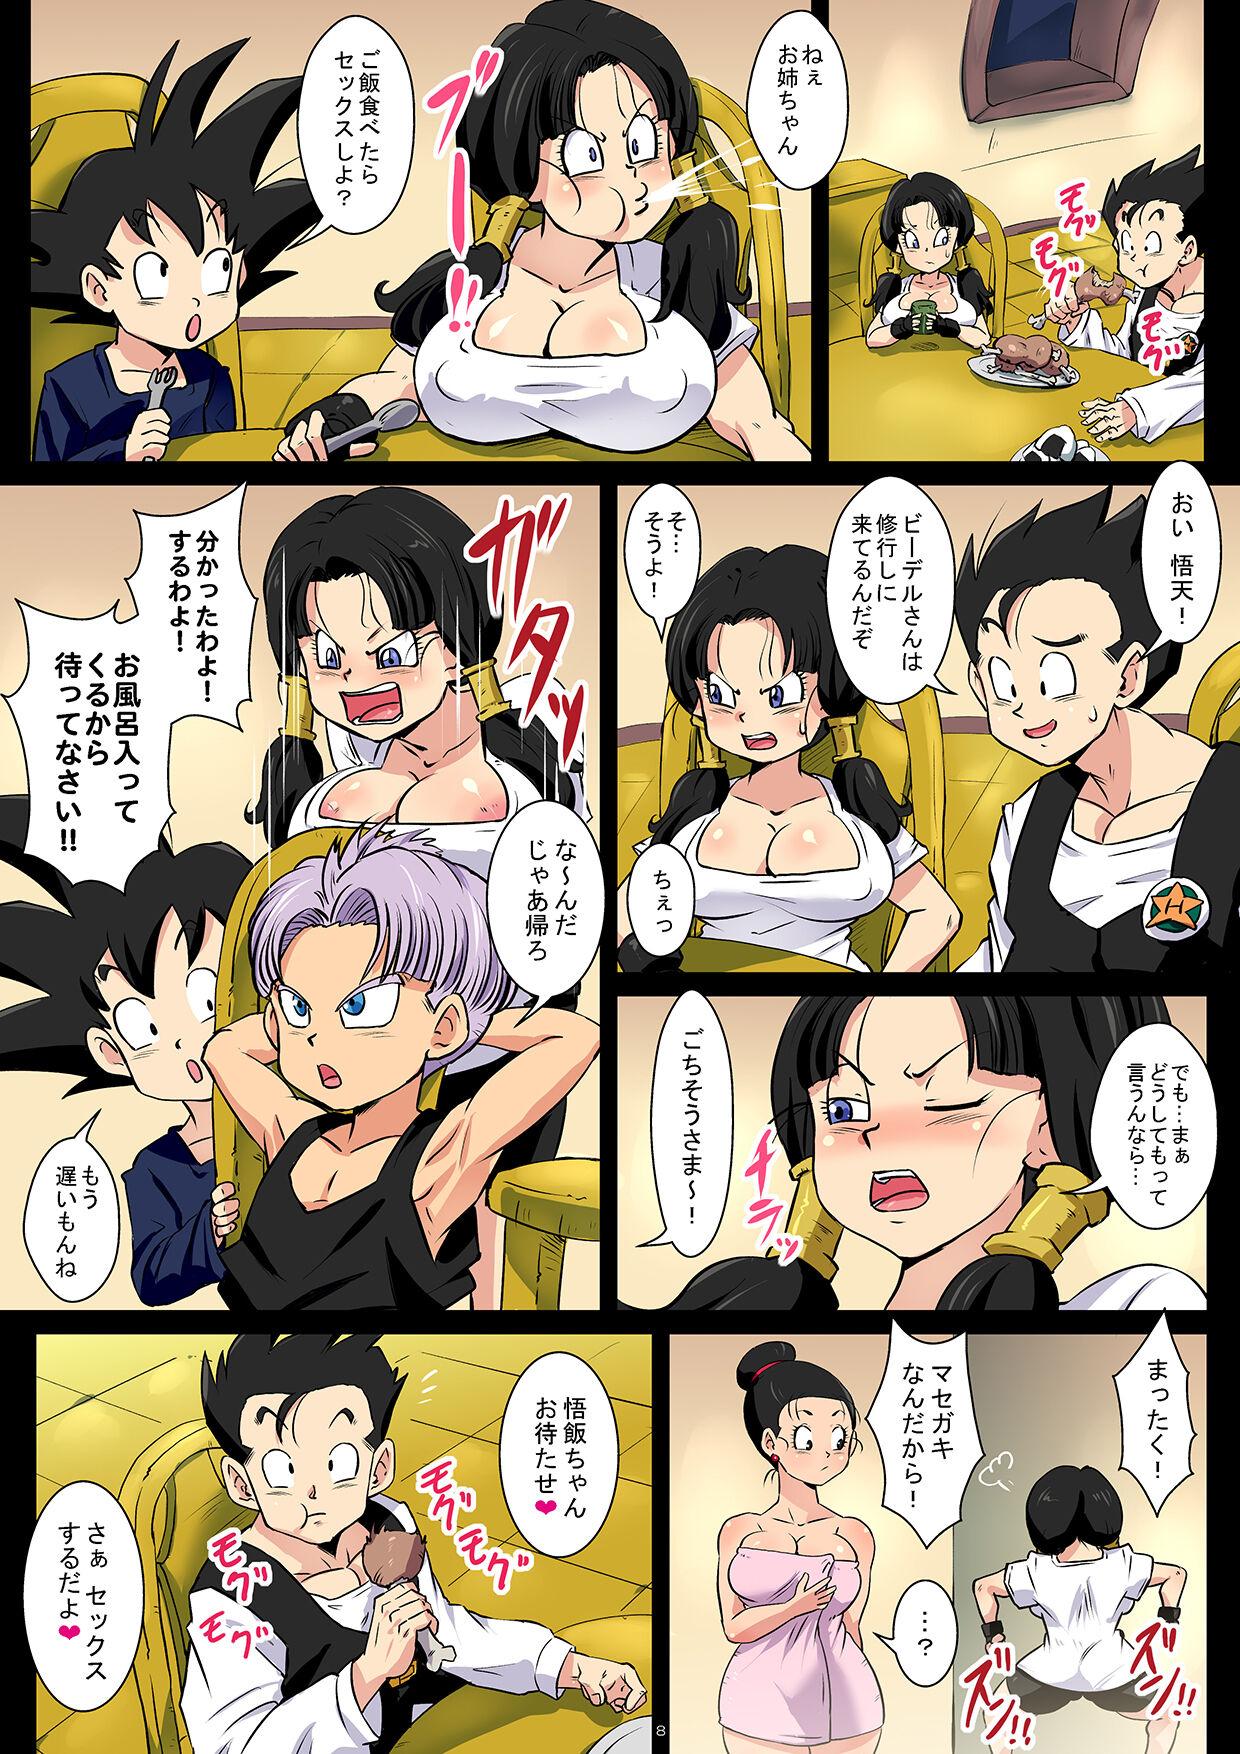 Sloppy Blow Job Gohan is addicted to sex with Chi Chi - Dragon ball z Solo Girl - Page 8